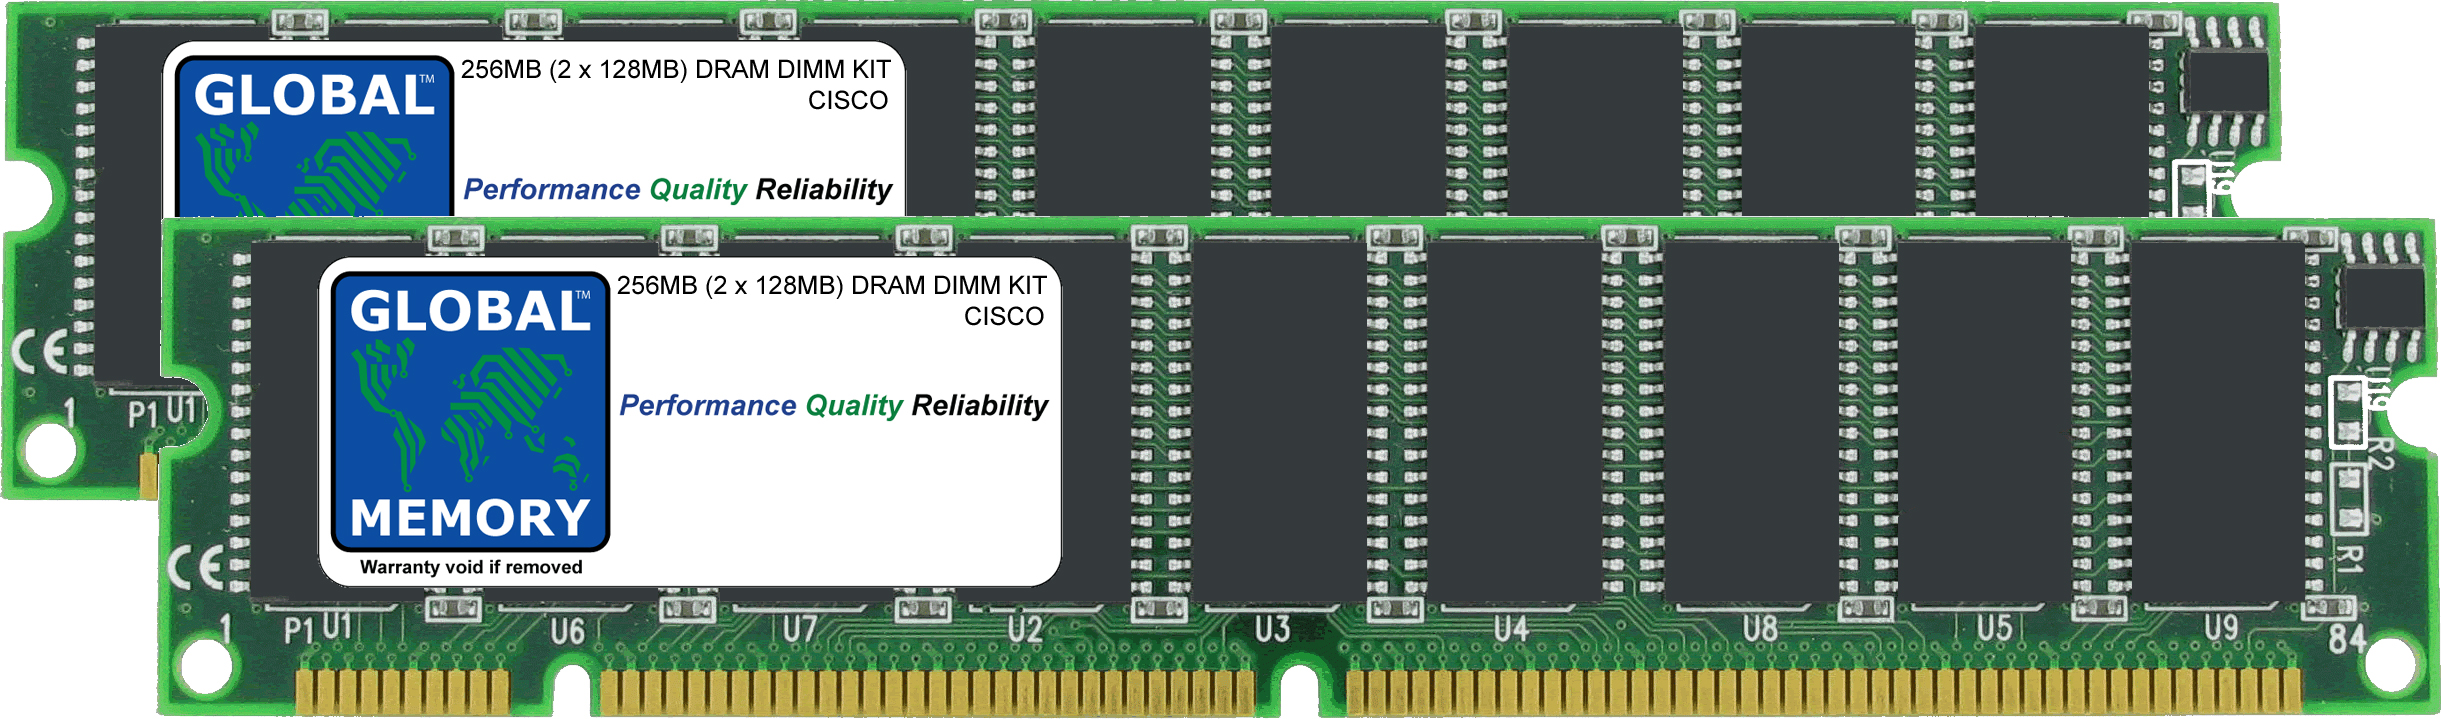 256MB (2 x 128MB) DRAM DIMM MEMORY RAM KIT FOR CISCO 12000 SERIES ROUTERS GRP LINE CARD (MEM-GRP/LC-256) - Click Image to Close